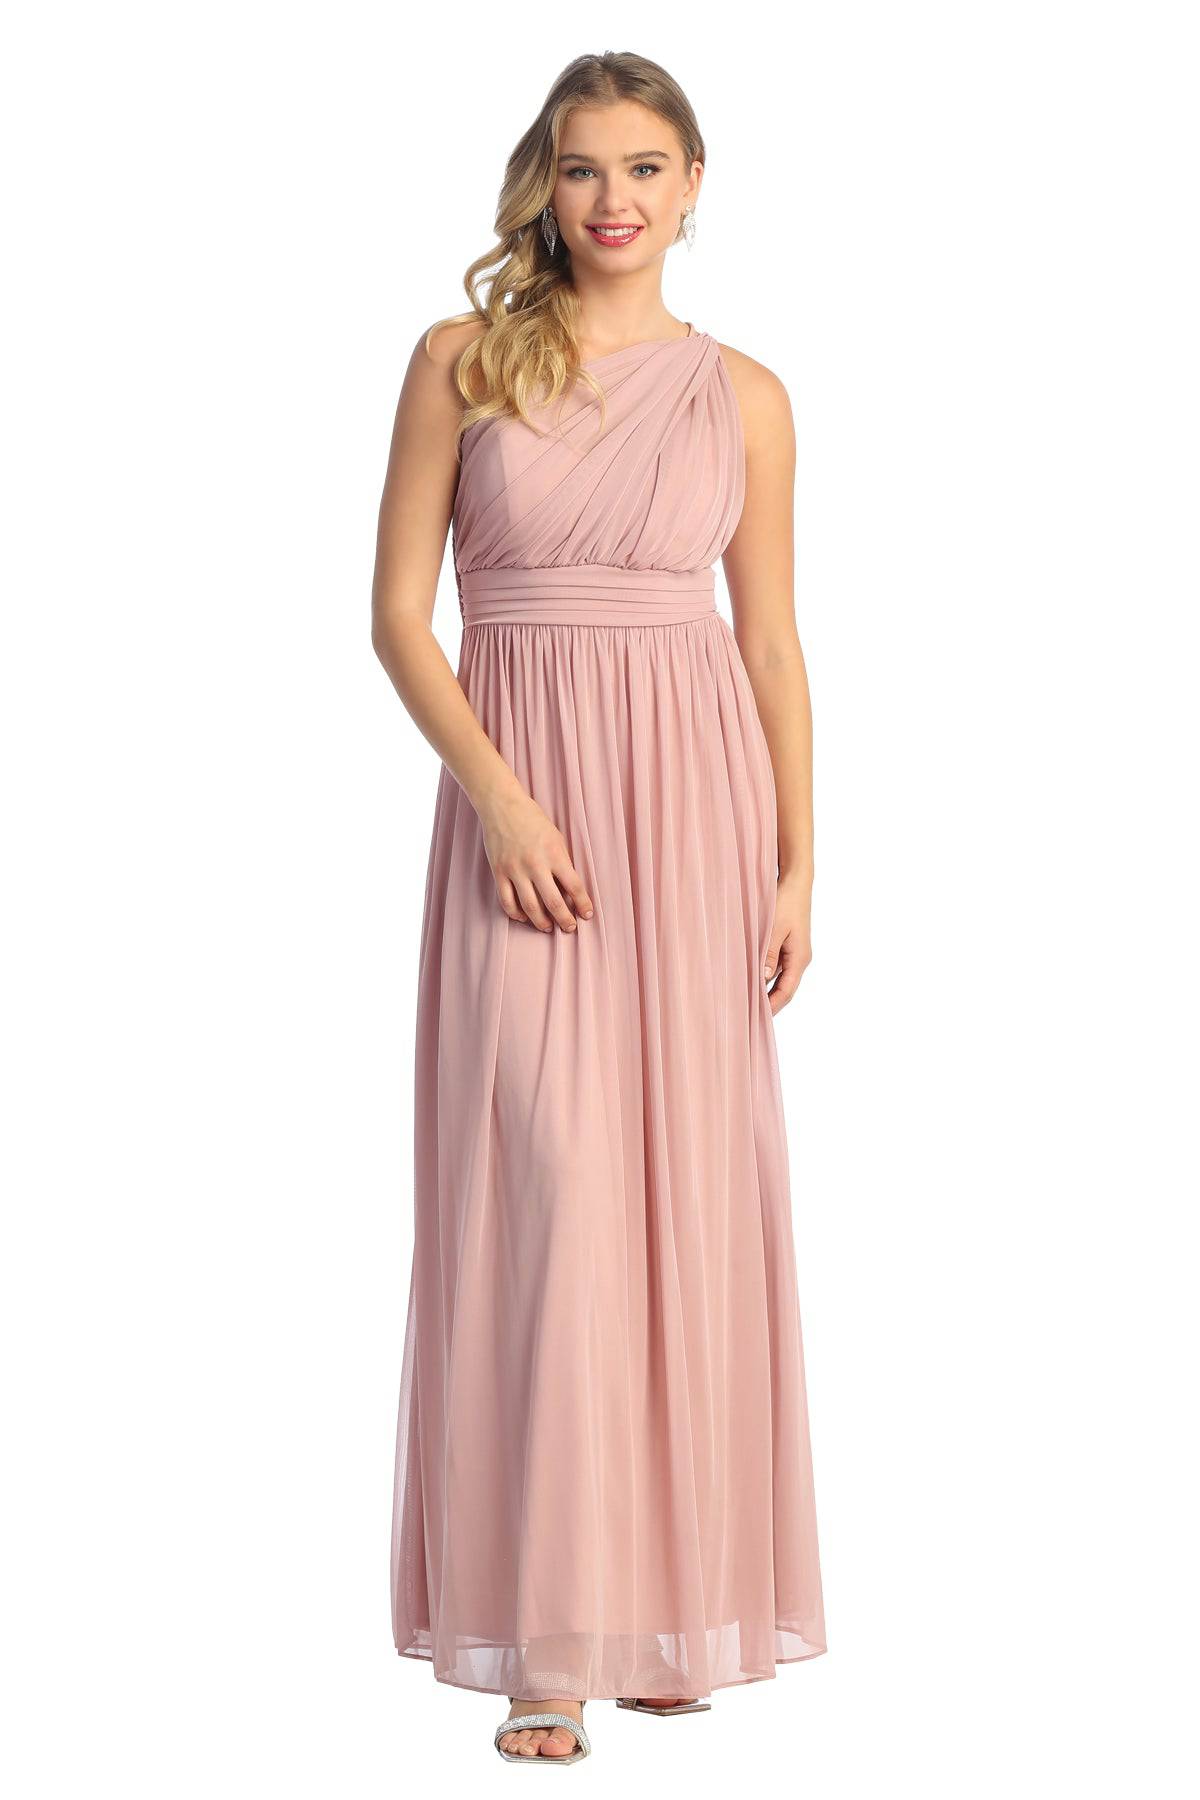 Cindy Collection 1548 Bridesmaid Dress - NORMA REED